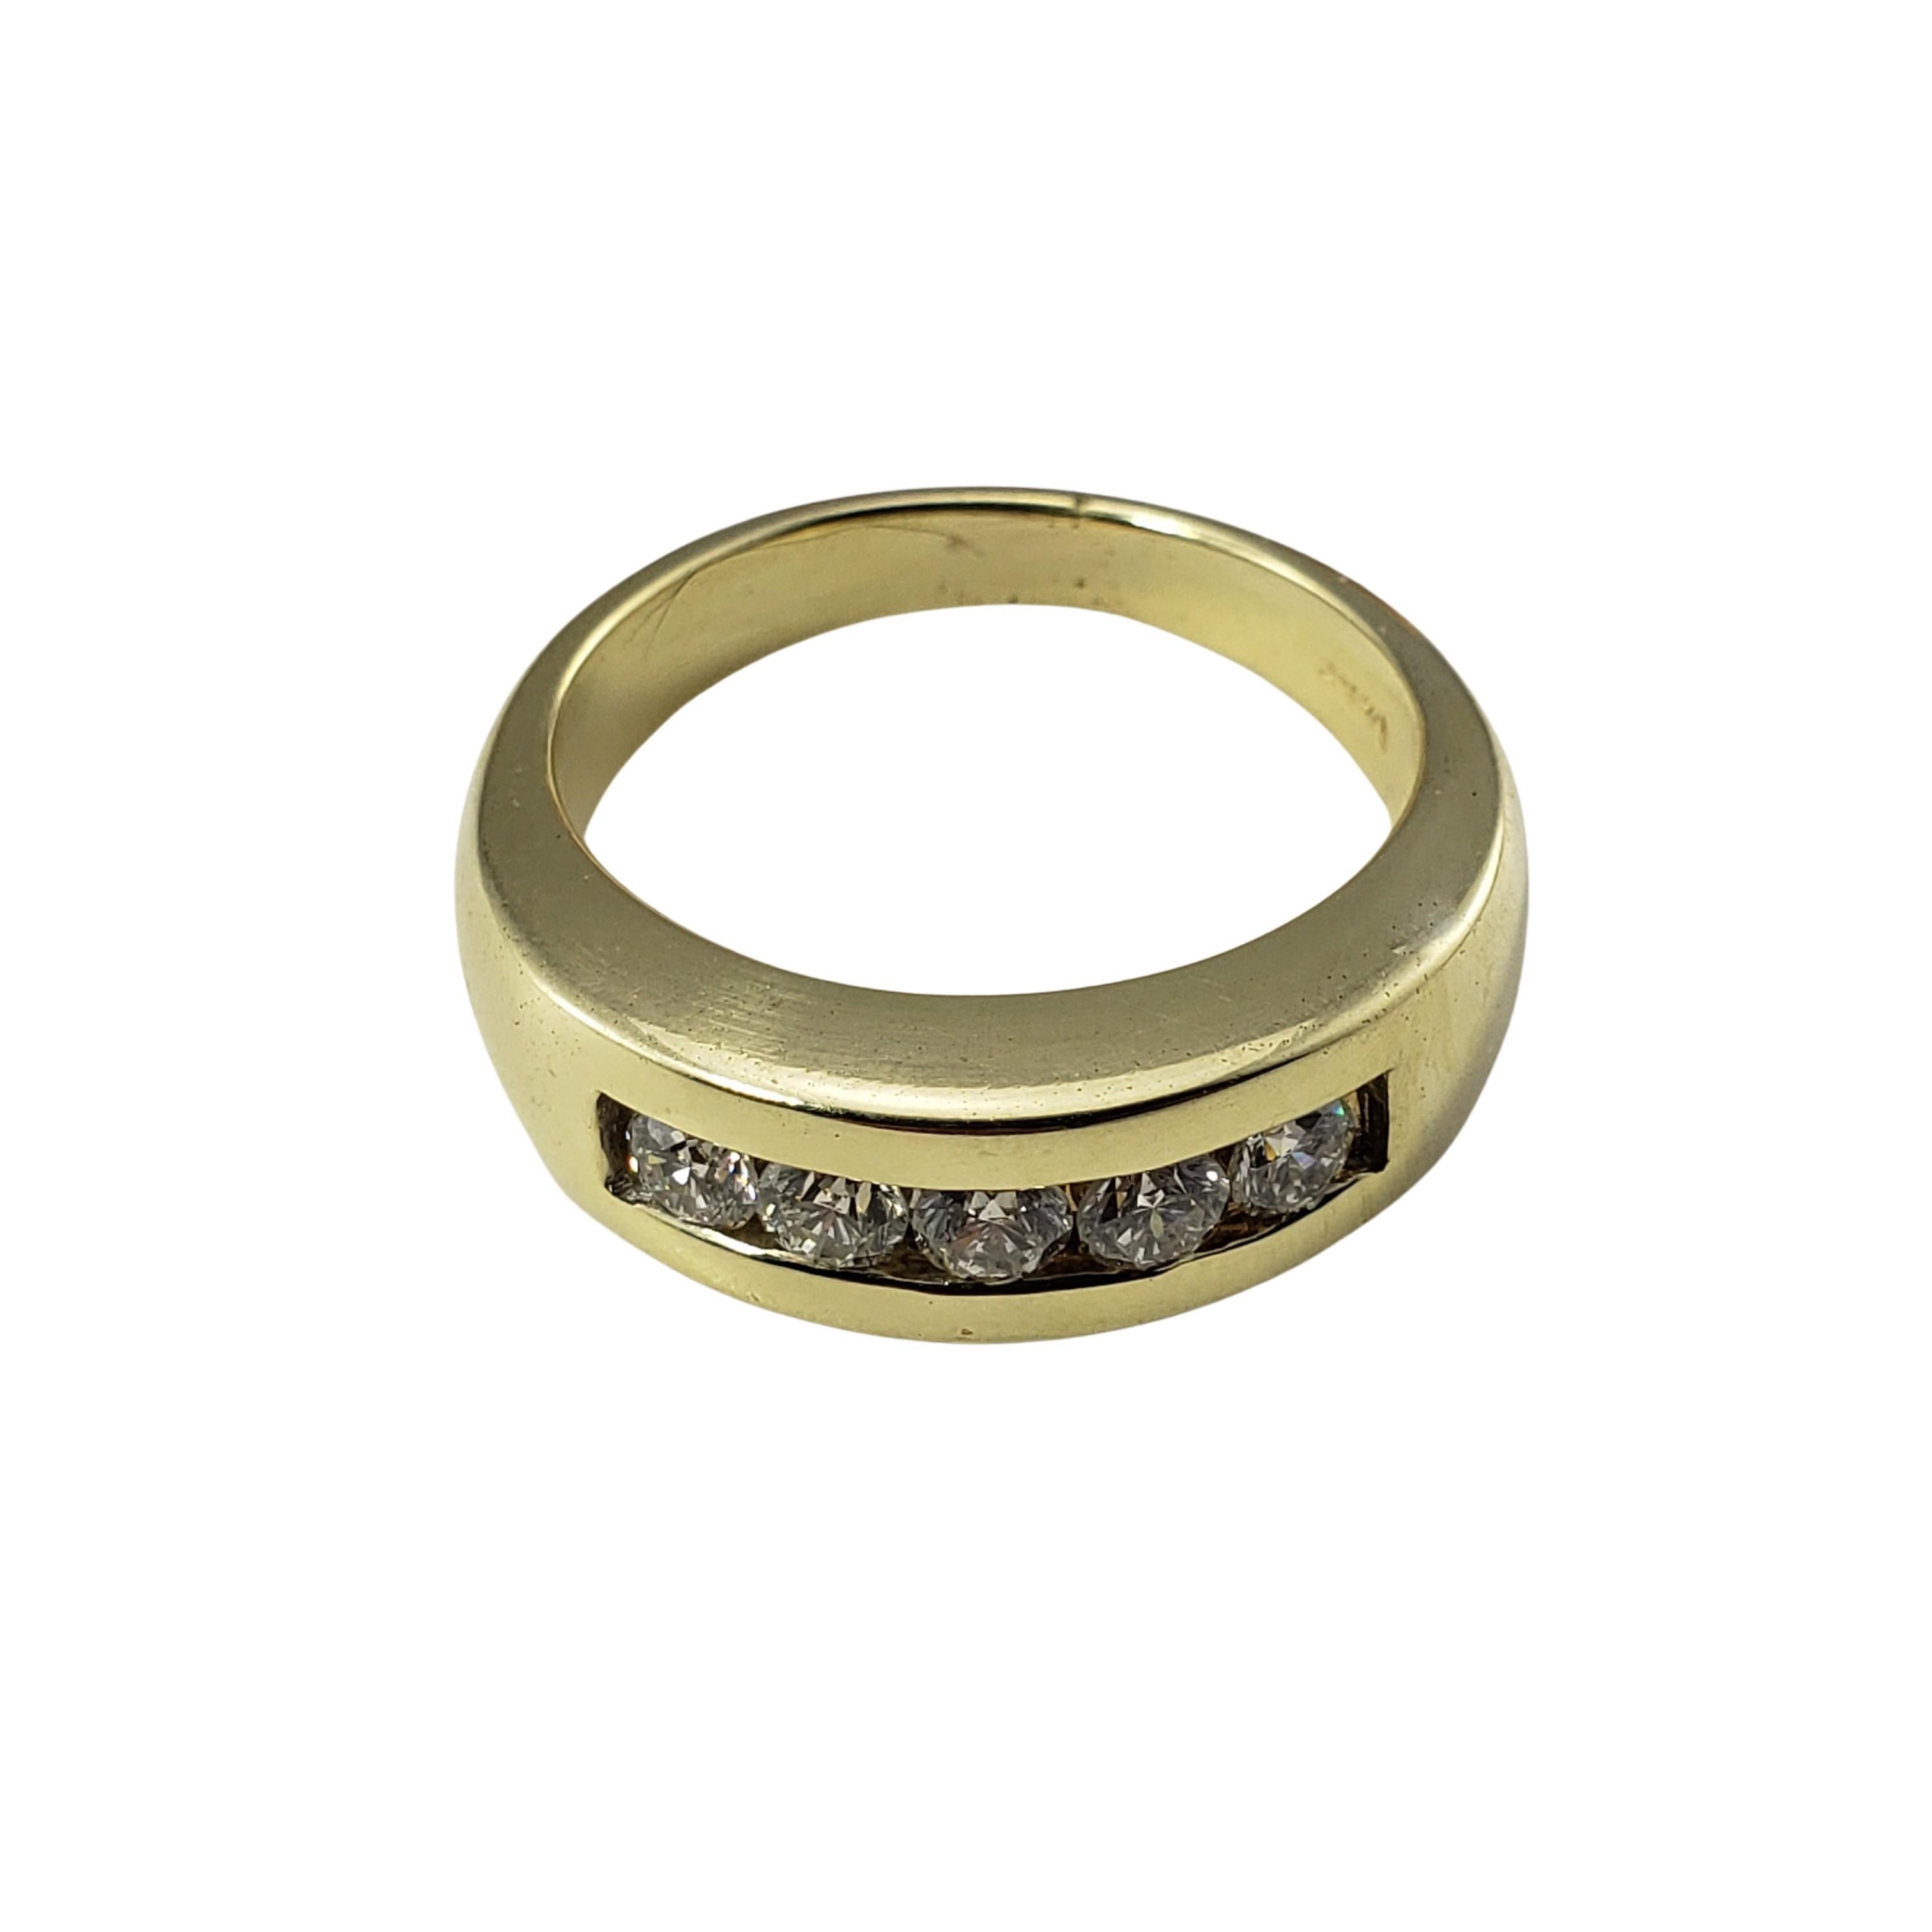 14 Karat Yellow Gold and Diamond Band Ring Size 9 -

This elegant band features five round brilliant cut diamond set in polished 14K yellow gold.  Width:  7 mm.  Shank:  4 mm.

Approximate total diamond weight:  .50 ct.

Diamond color:  F-G

Diamond